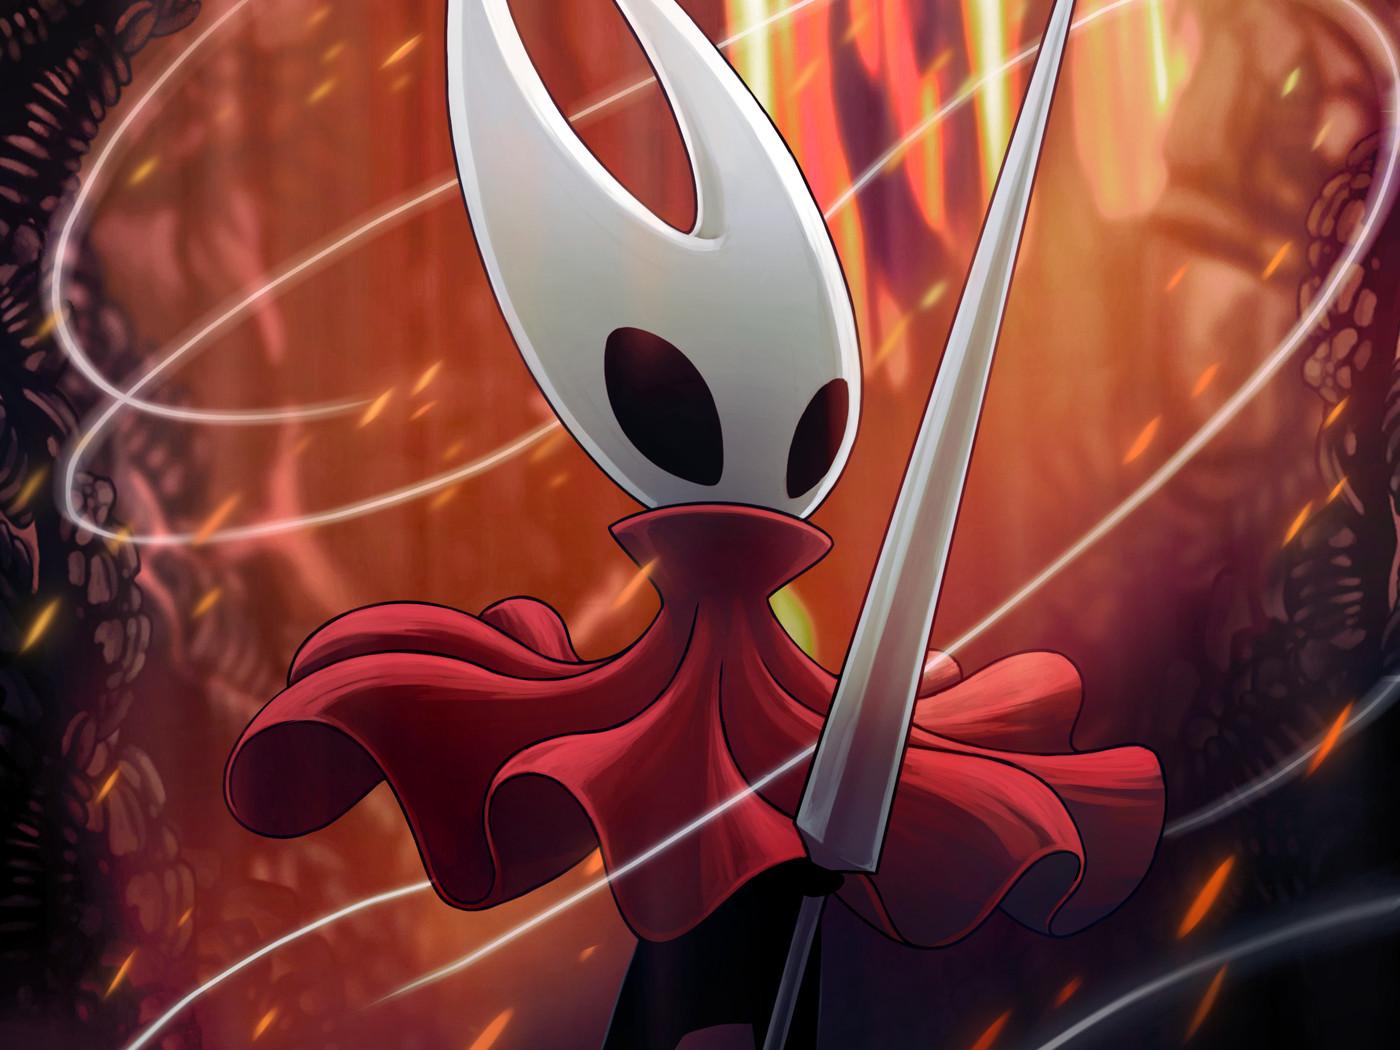 download hollow knight silksong news